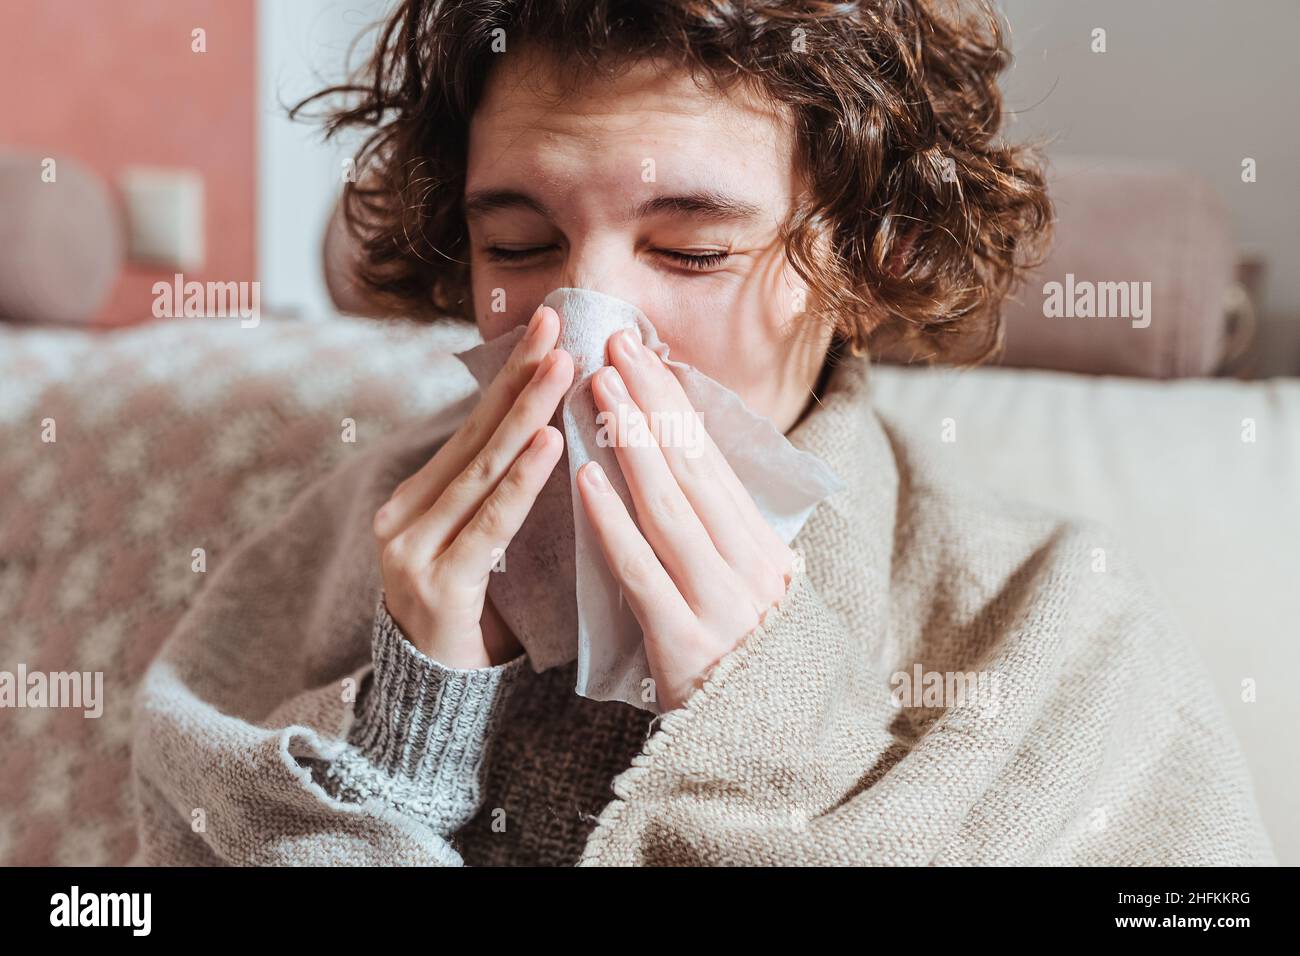 Sick upset young woman sitting on sofa covered with warm plaid, freezing, grimacing, runny nose, fever, sneezing into tissue, sick girl with flu sympt Stock Photo